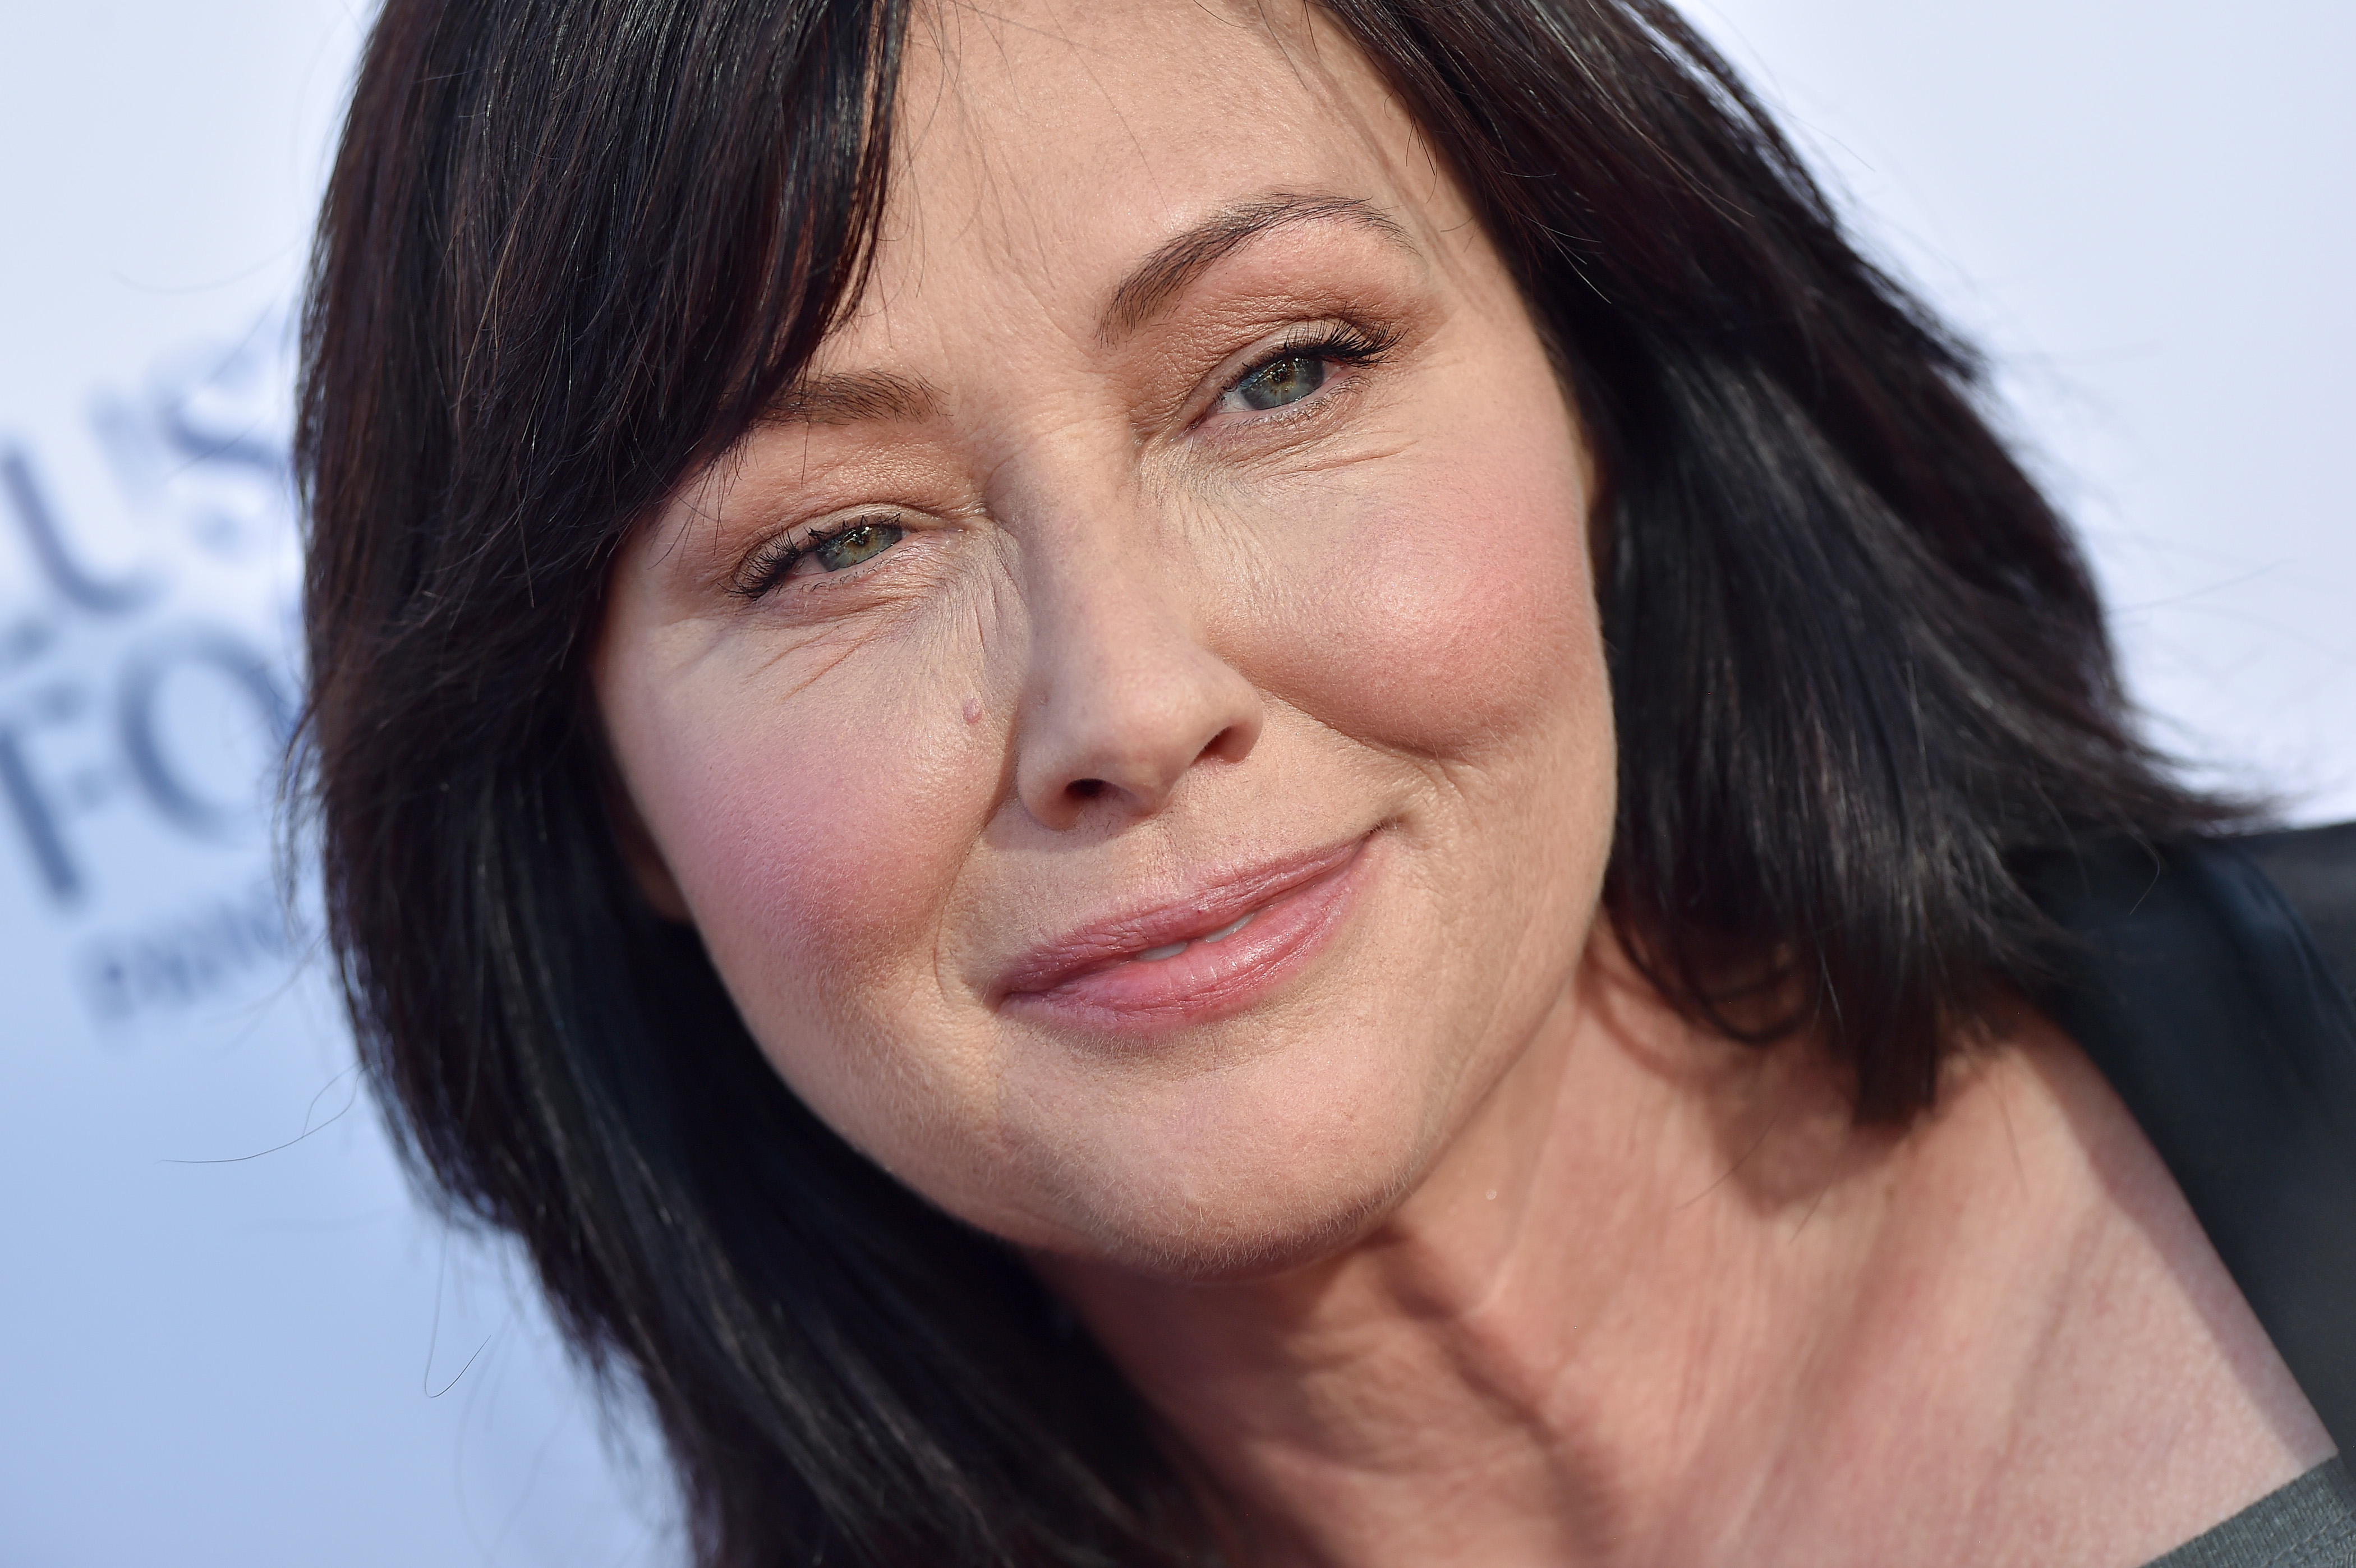 Shannen Doherty in Santa Monica, California on Friday, September 7, 2018 | Source: Getty Images